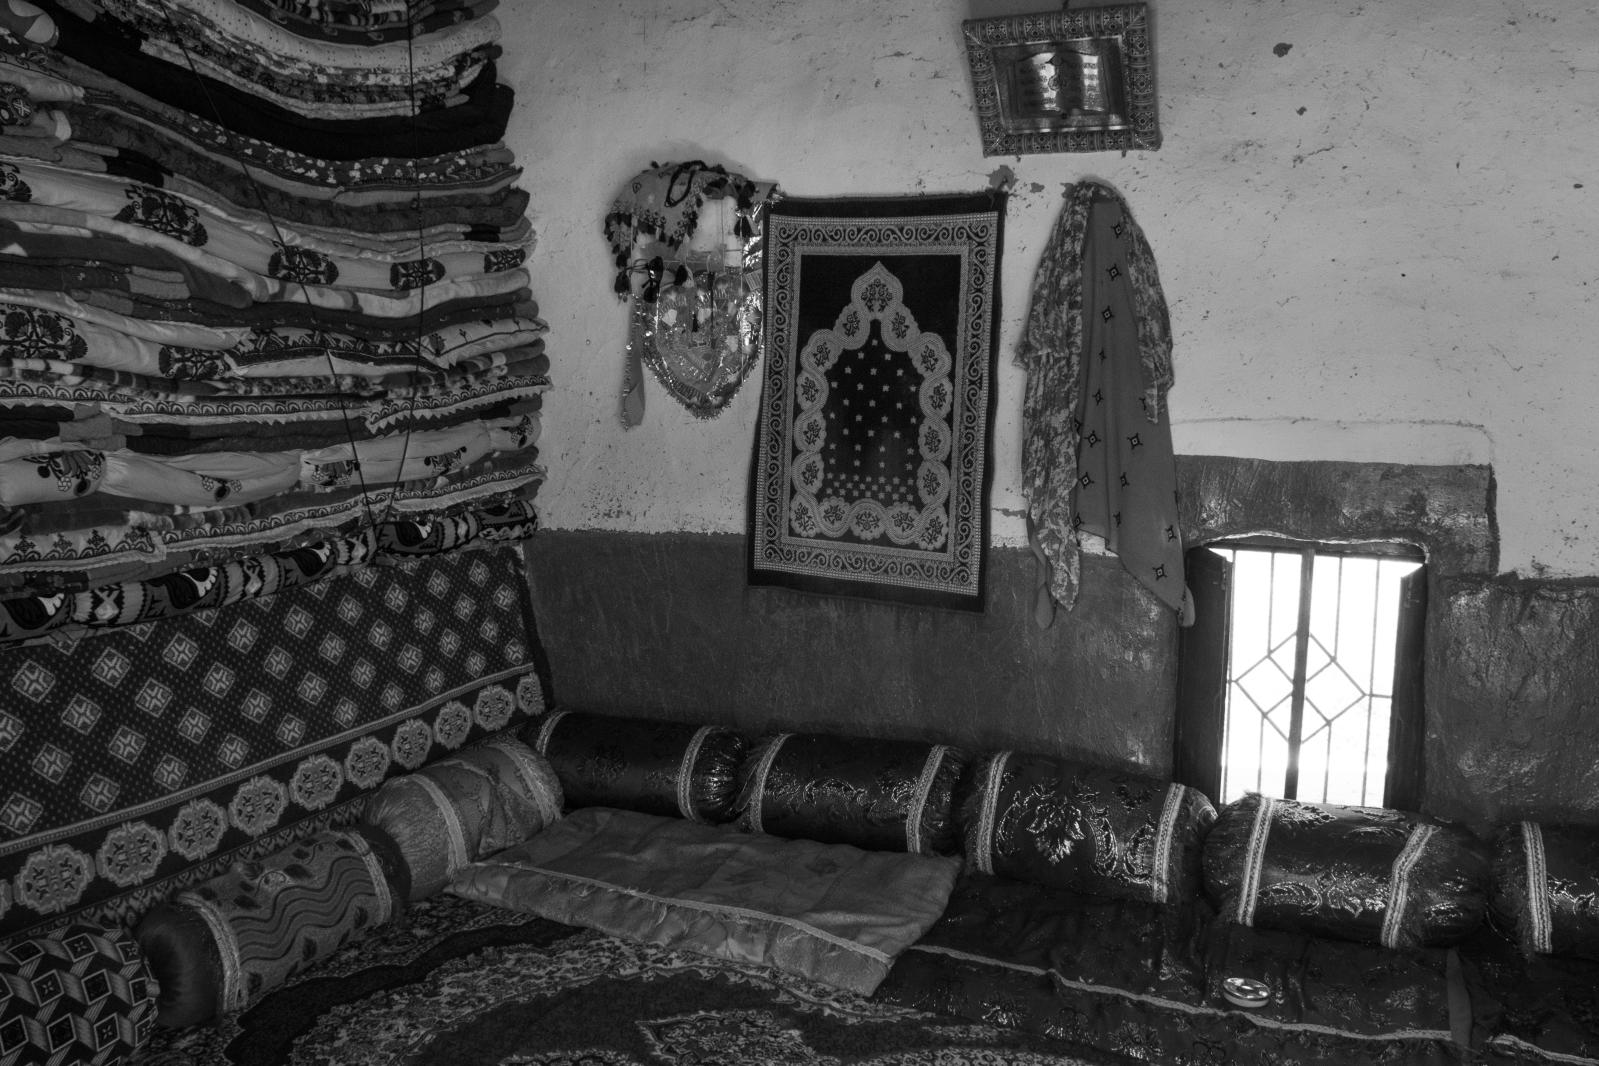 Luma’ (mother) - The room of her daughter Fatima (named after her mother)...